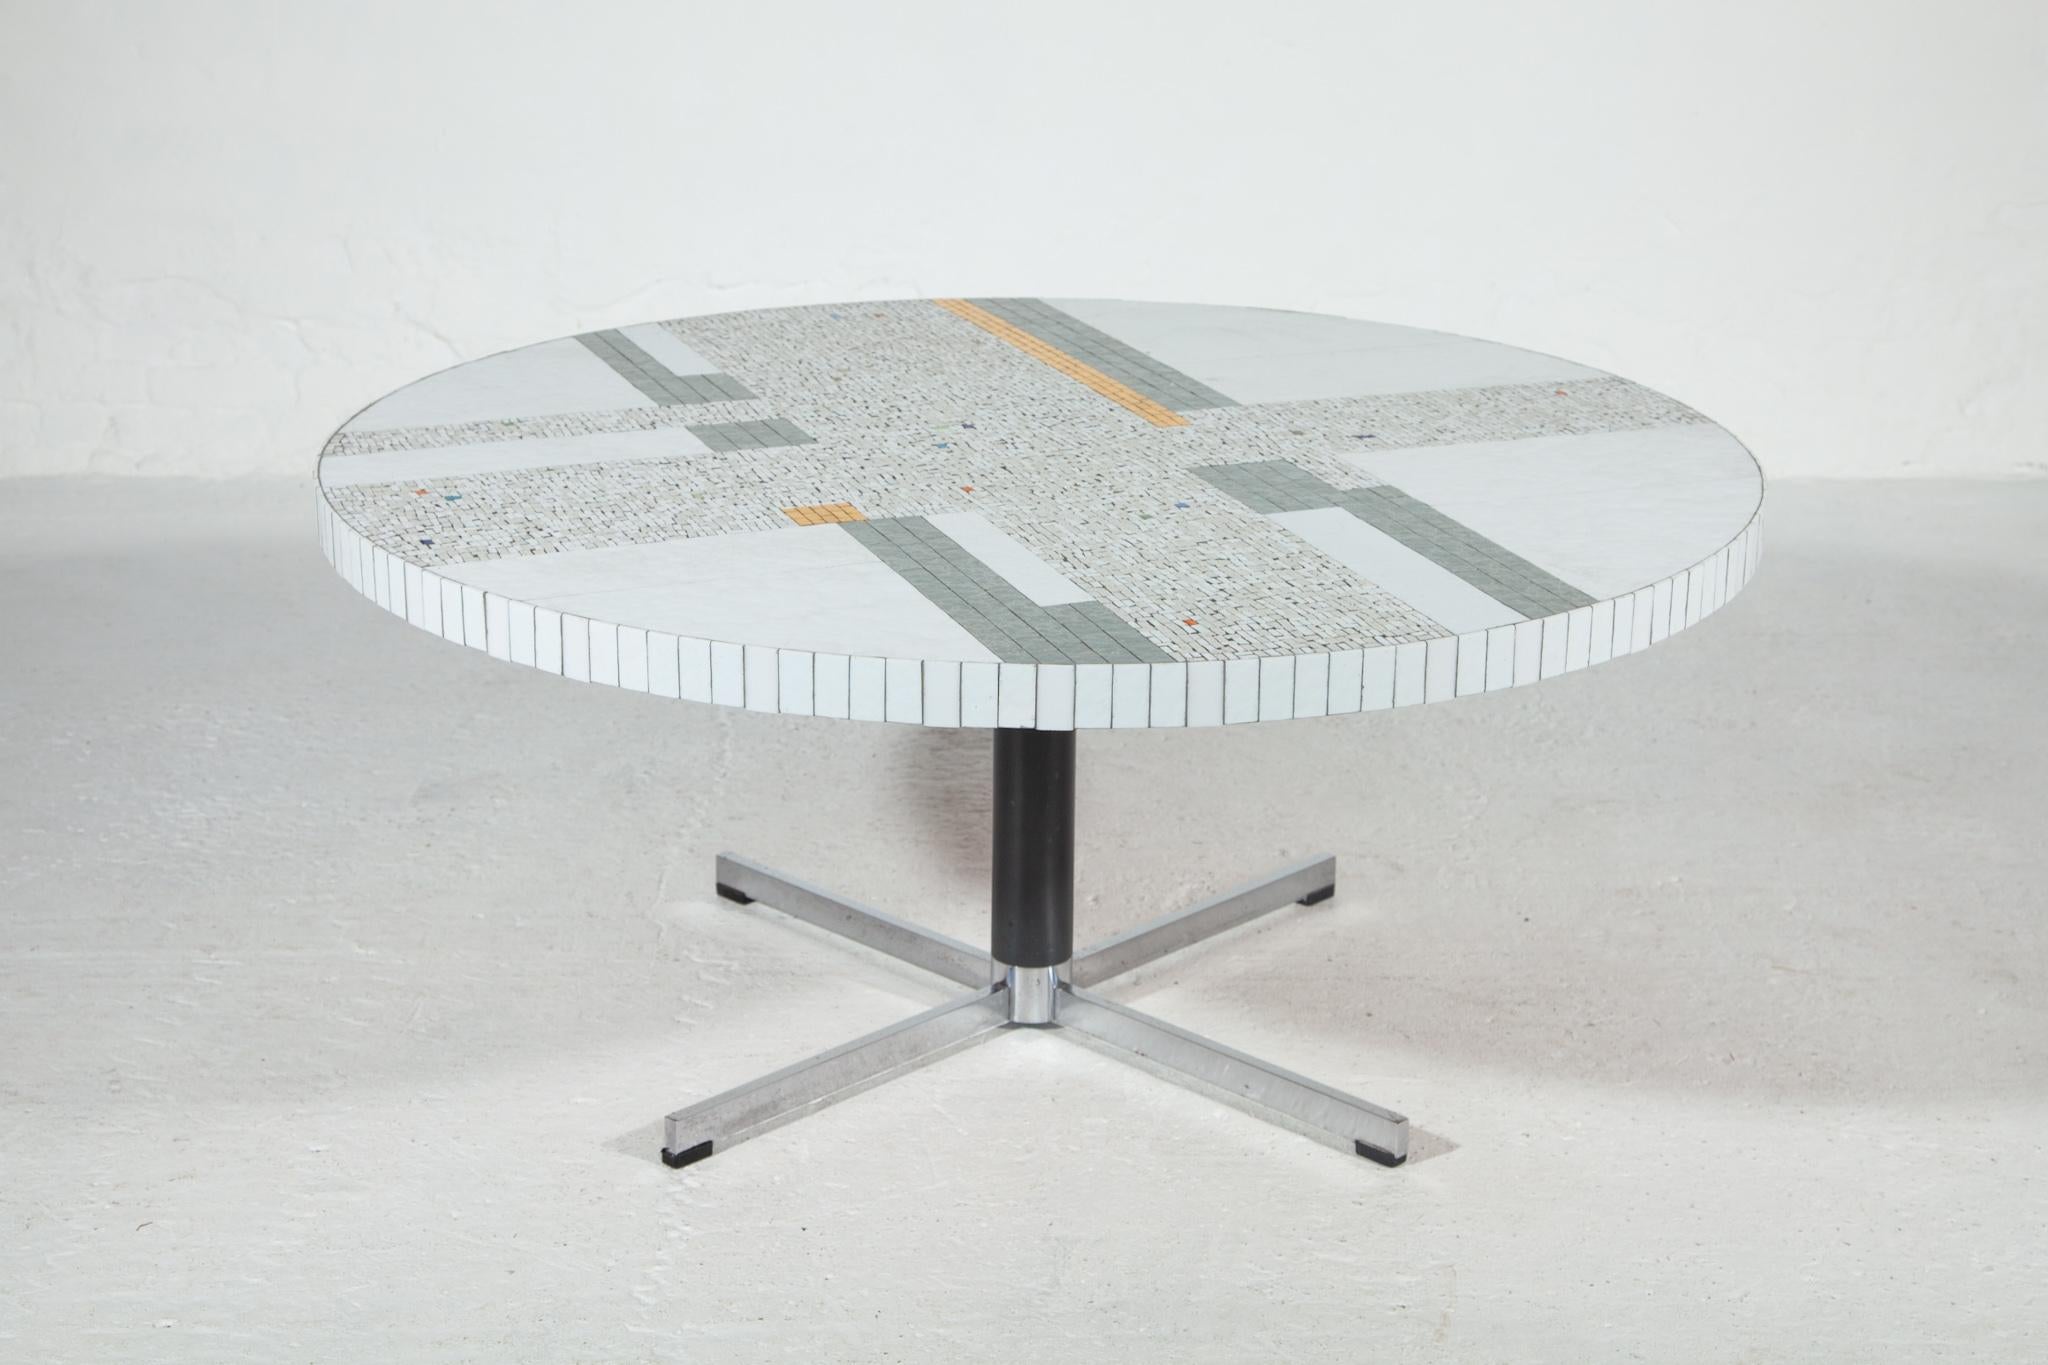 Beautiful round Mosaic top coffee table designed by Berthold Müller one of the most beautiful examples. The mosaic pattern on top is a fascinating work in modern style and contrast in white and gold and other color accents in grey, blue, red, green